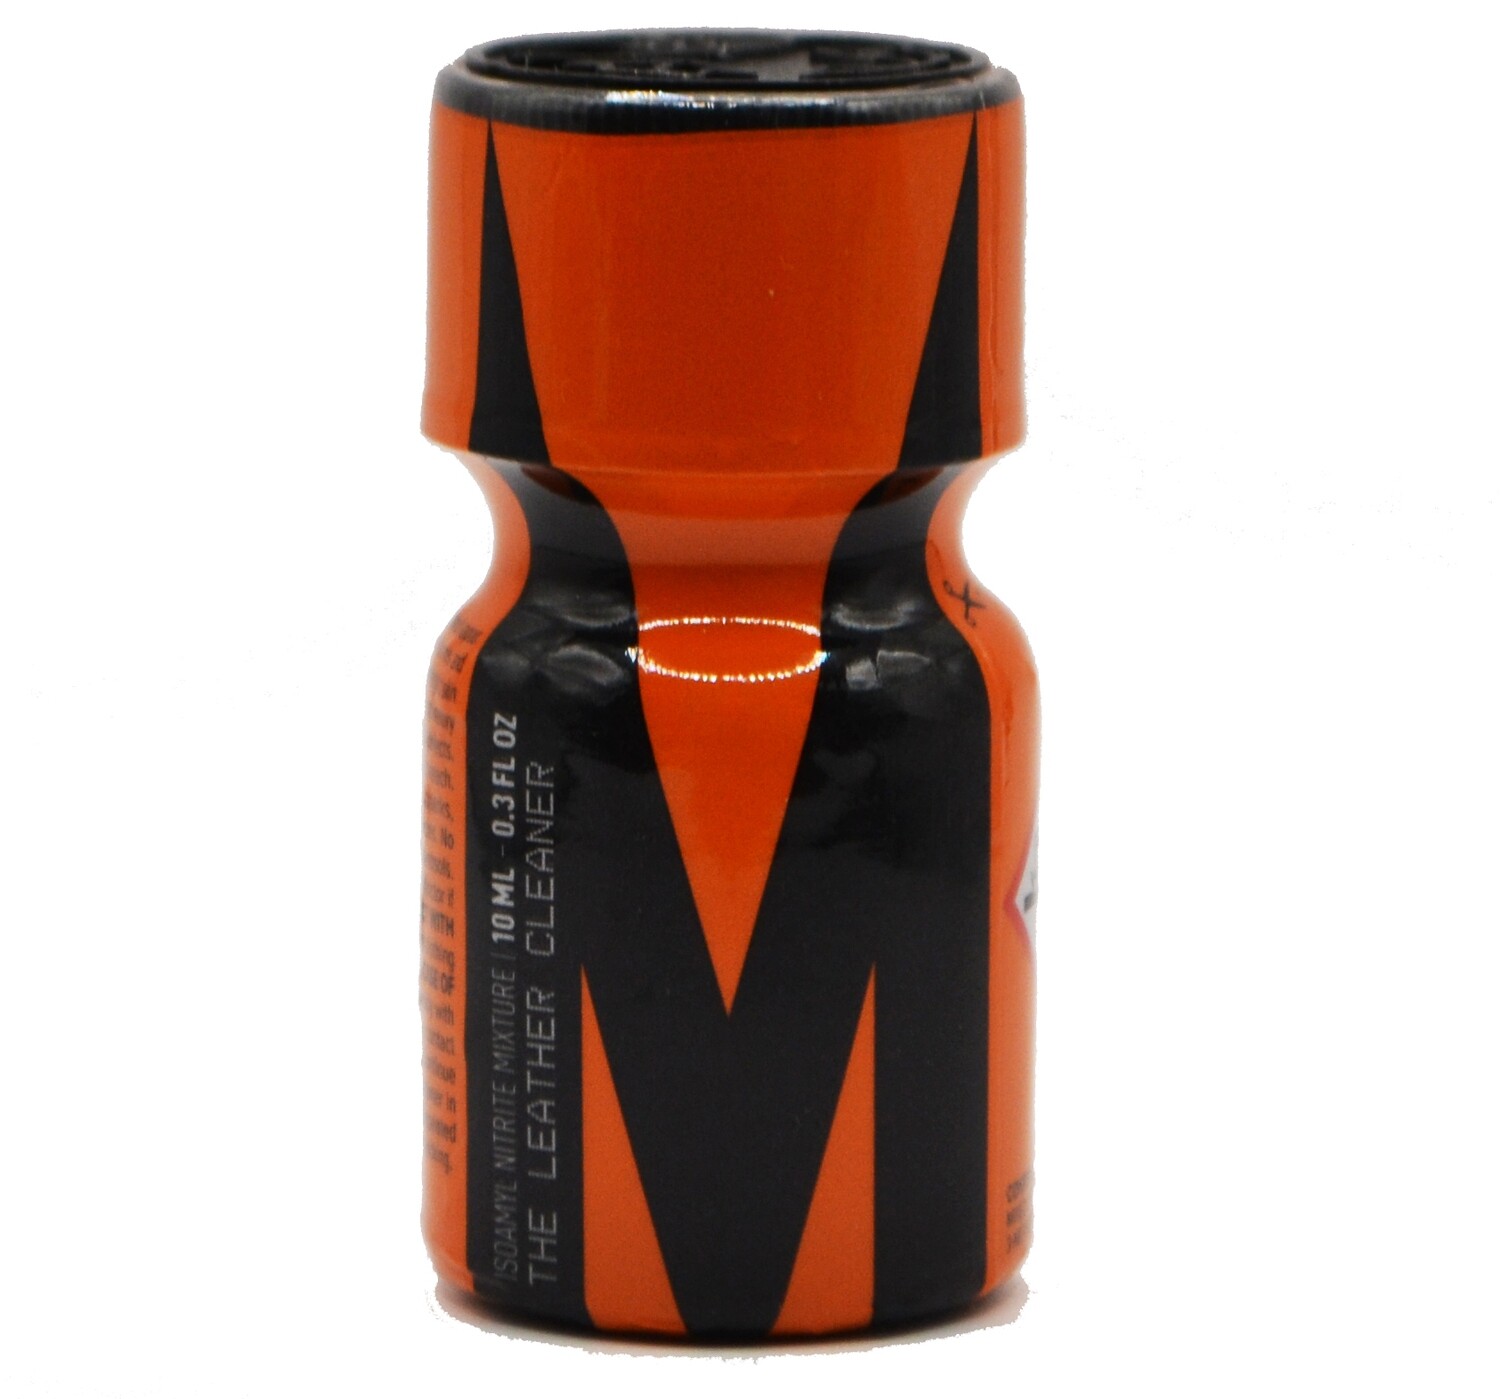 M, the leather cleaner lux 10 ml.